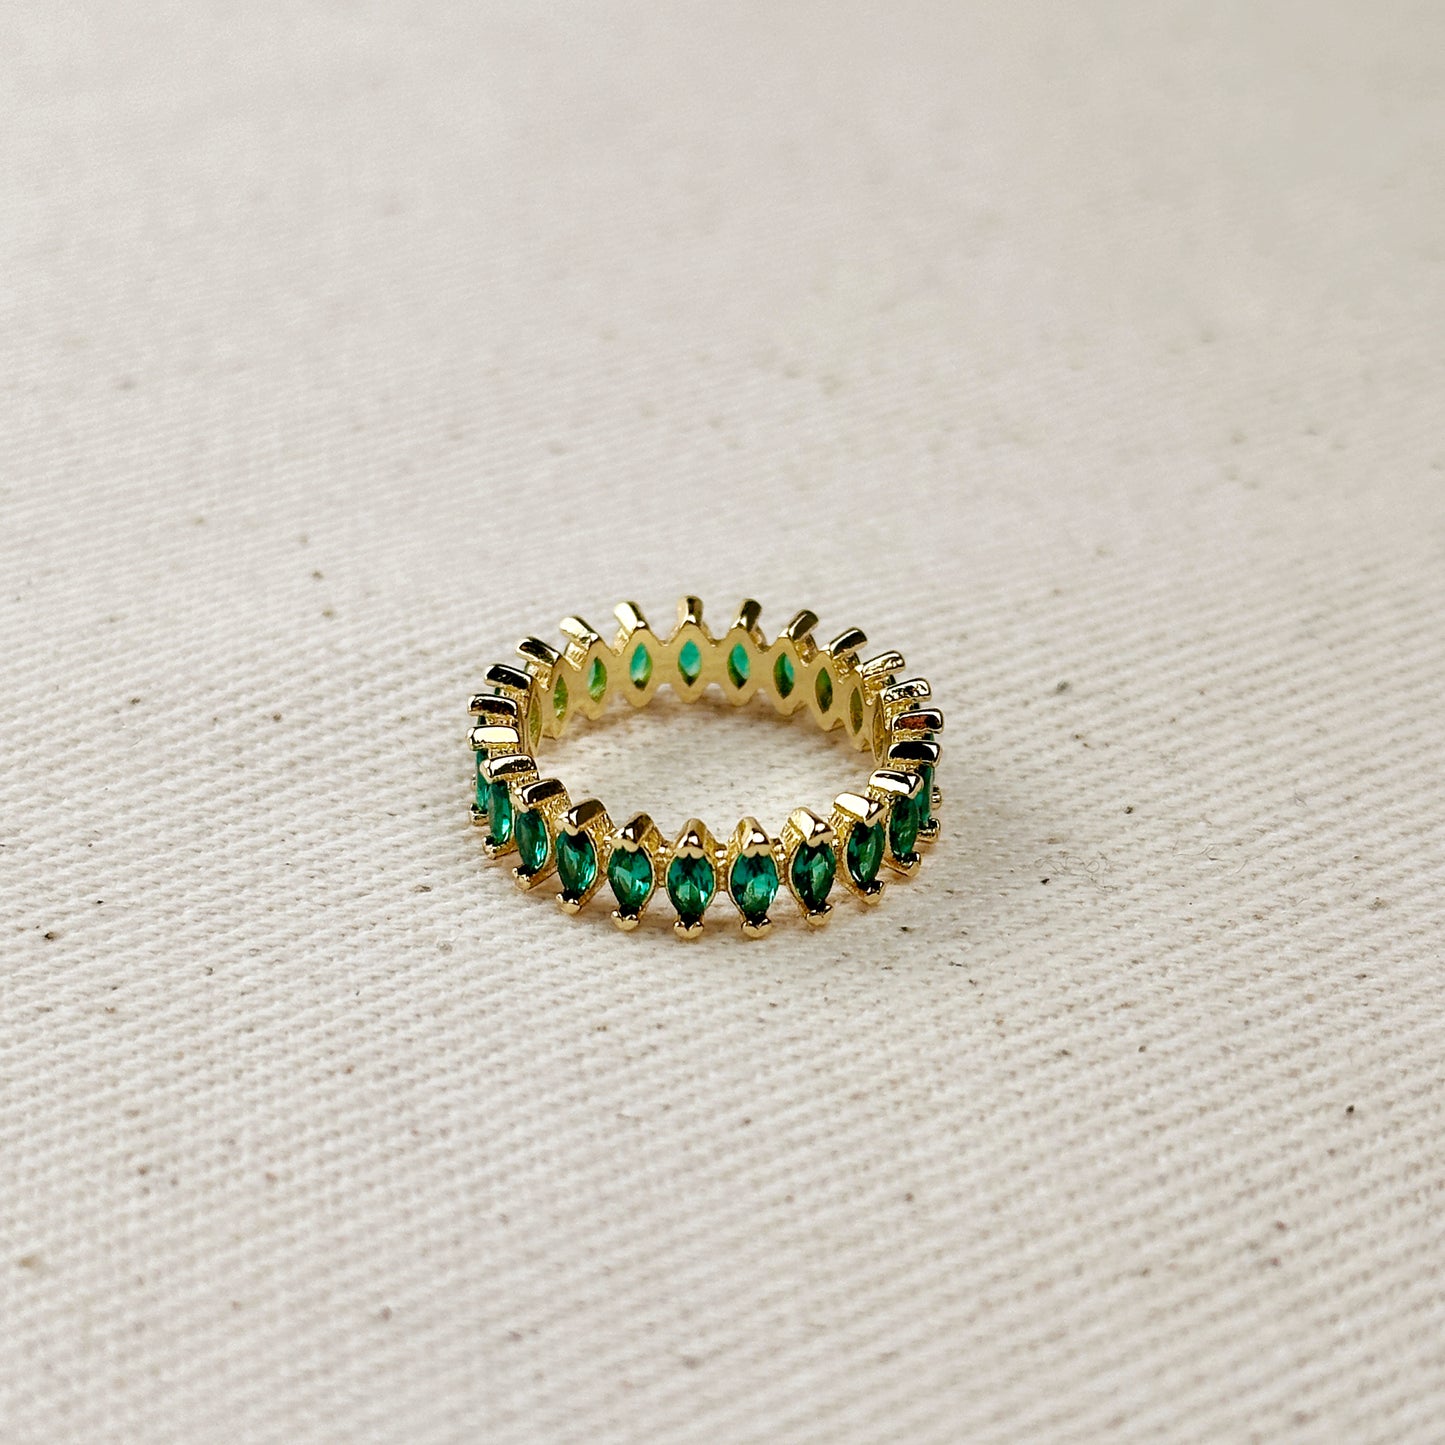 18k Gold Filled Marquise Eternity Band Ring